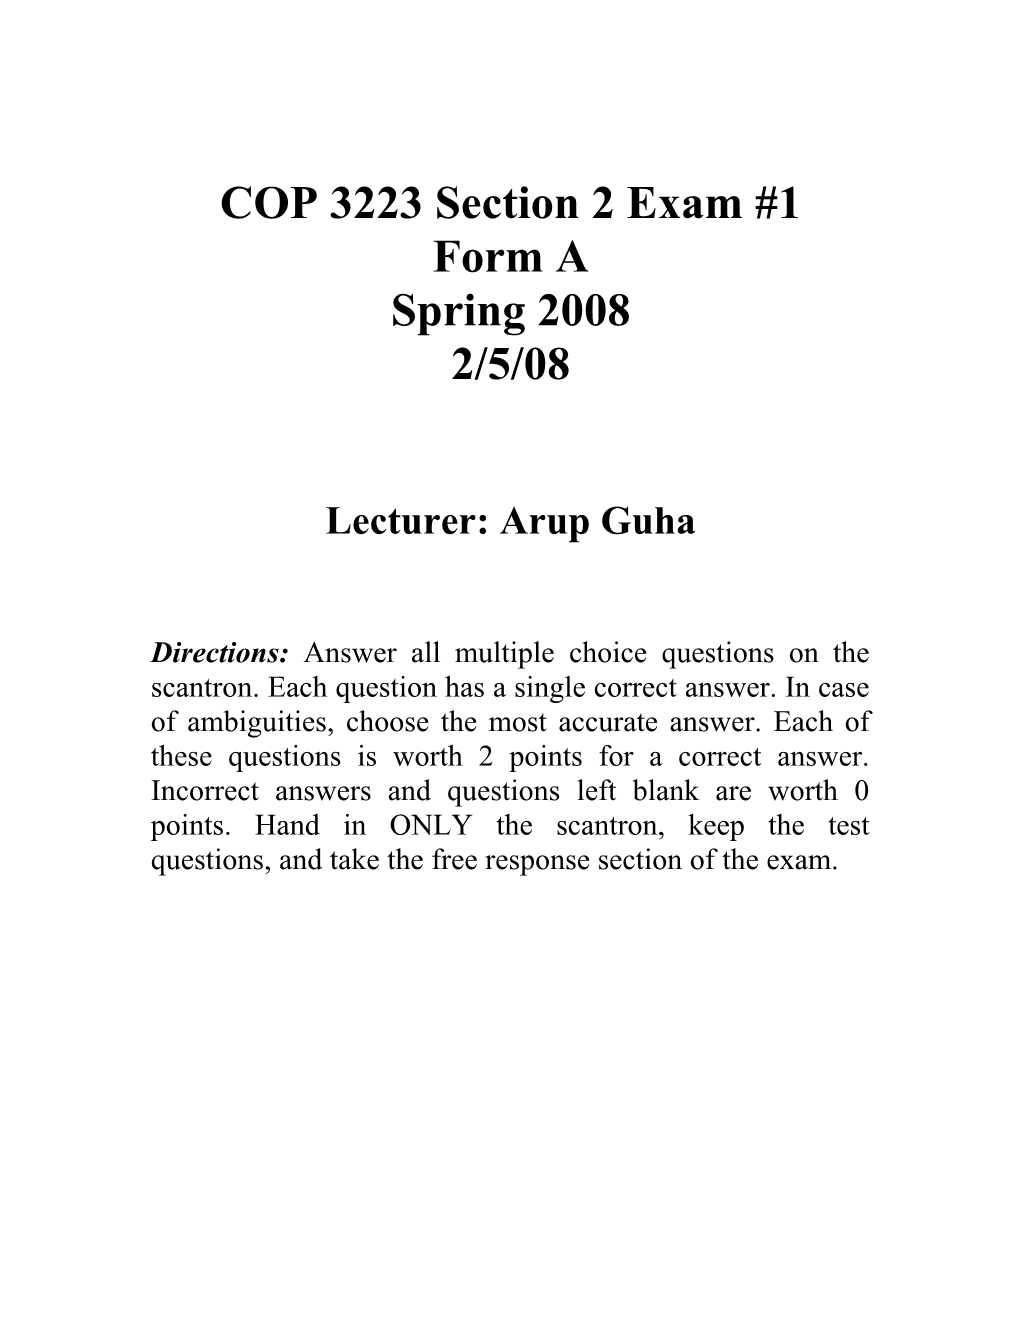 COP 3223 Section 2 Exam #1